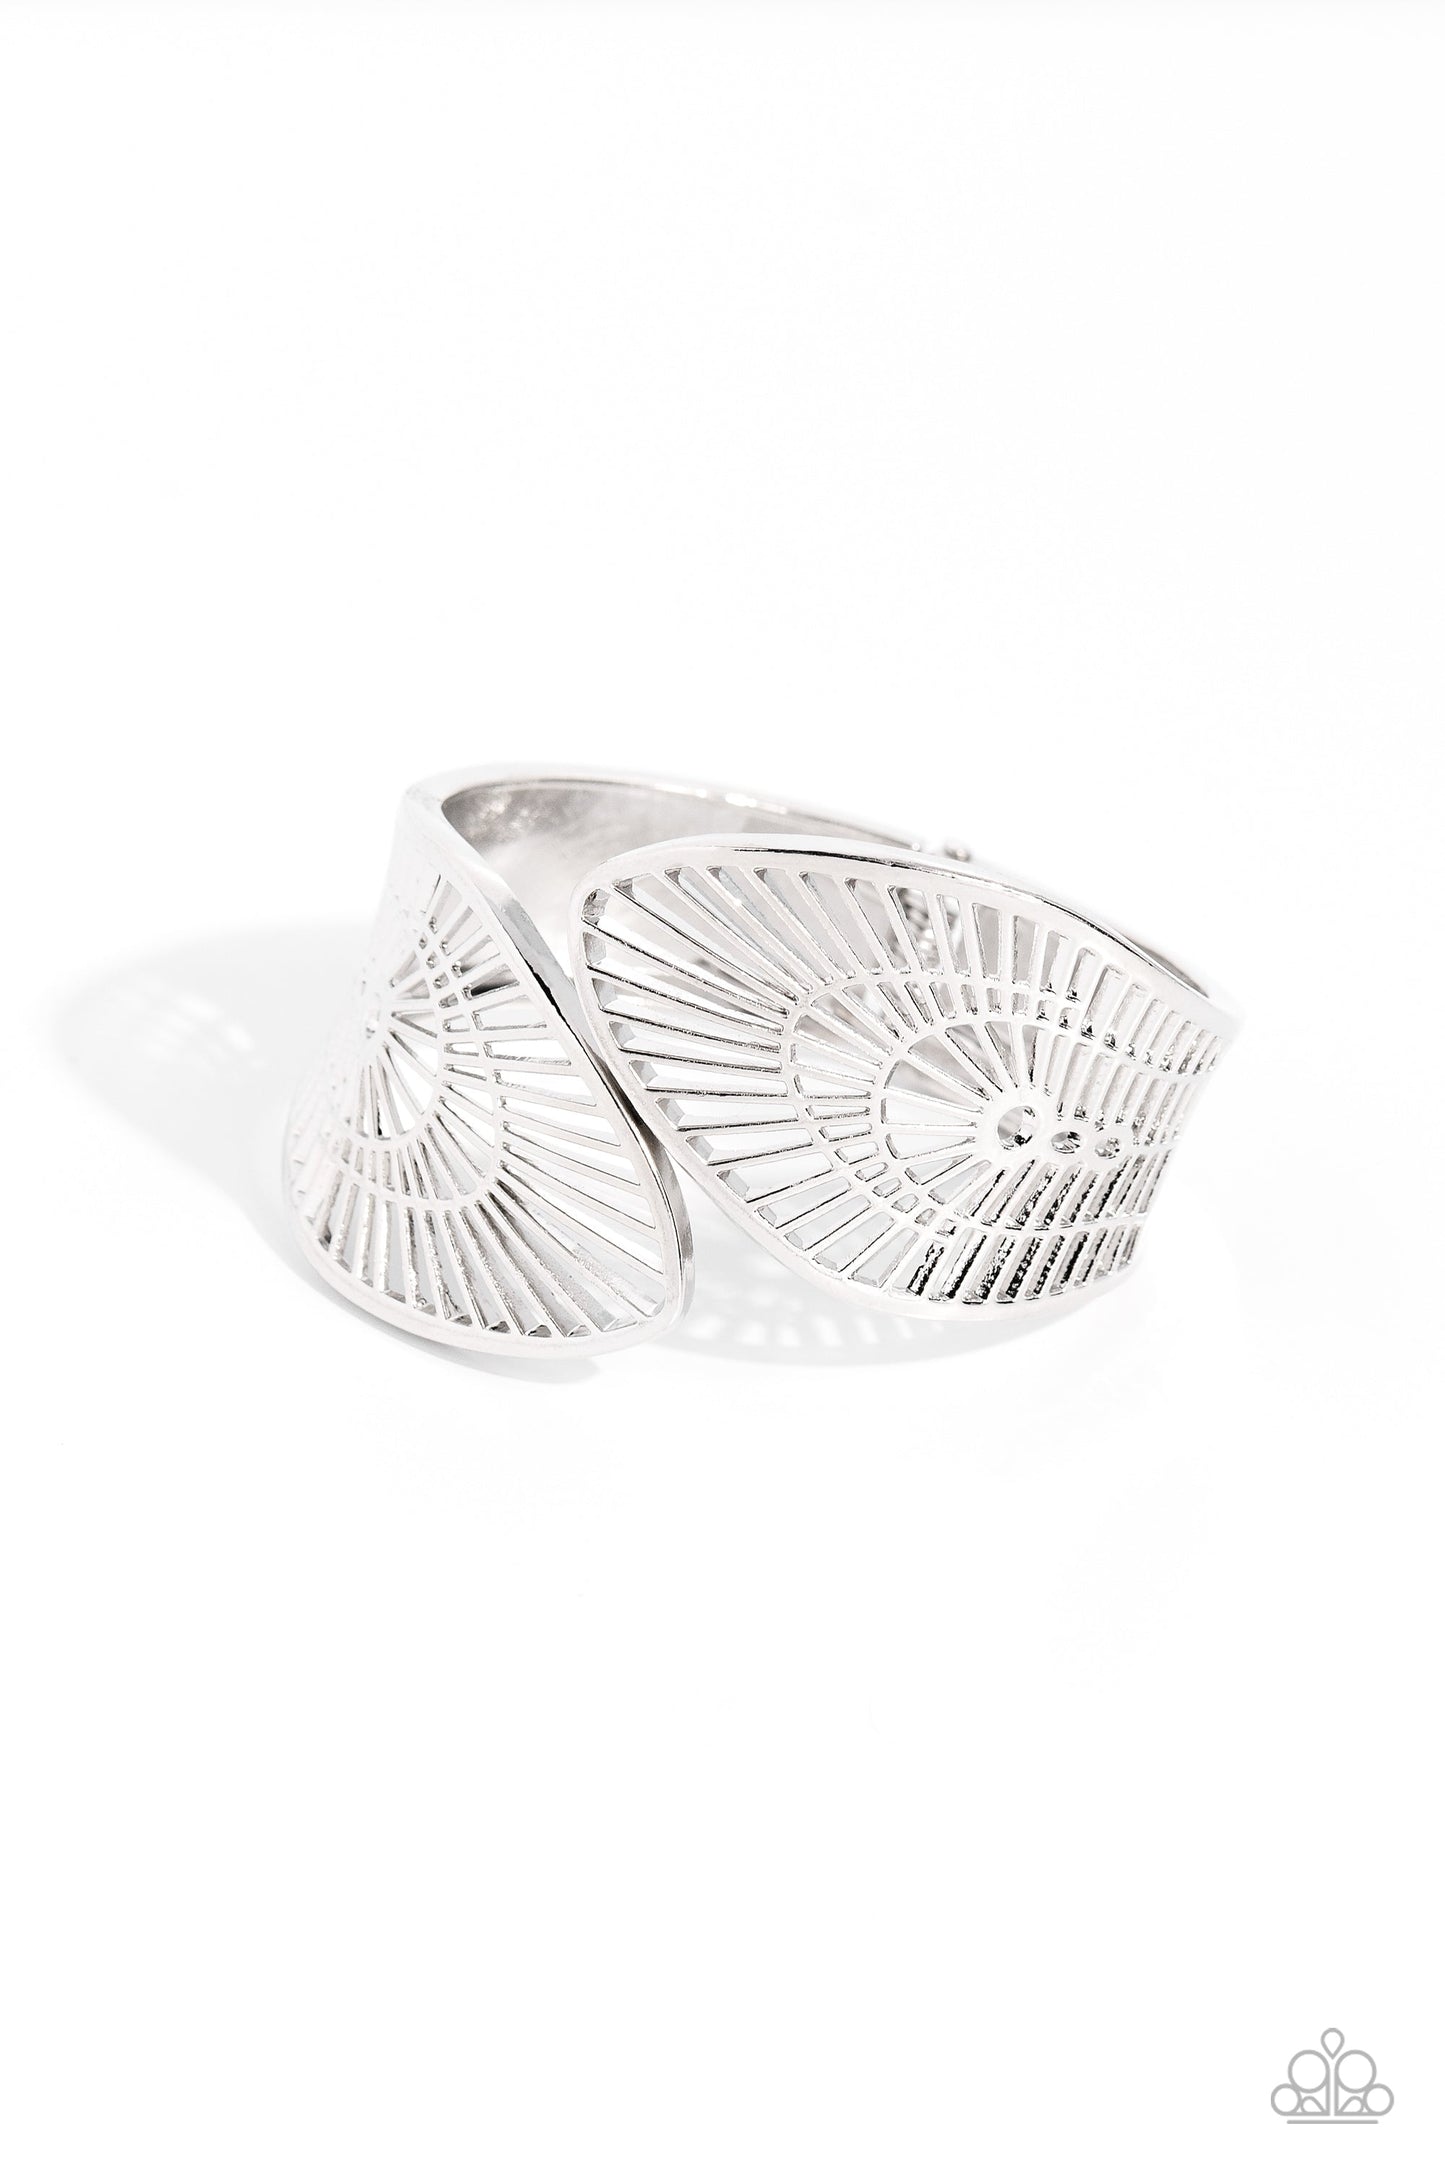 Palatial Palms - Silver Fashion Bracelet - Paparazzi Accessories - Glistening silver bars coalesce into an airy stenciled palm leaf-like bracelet around the wrist for a whimsically metallic look. Features a hinged closure.